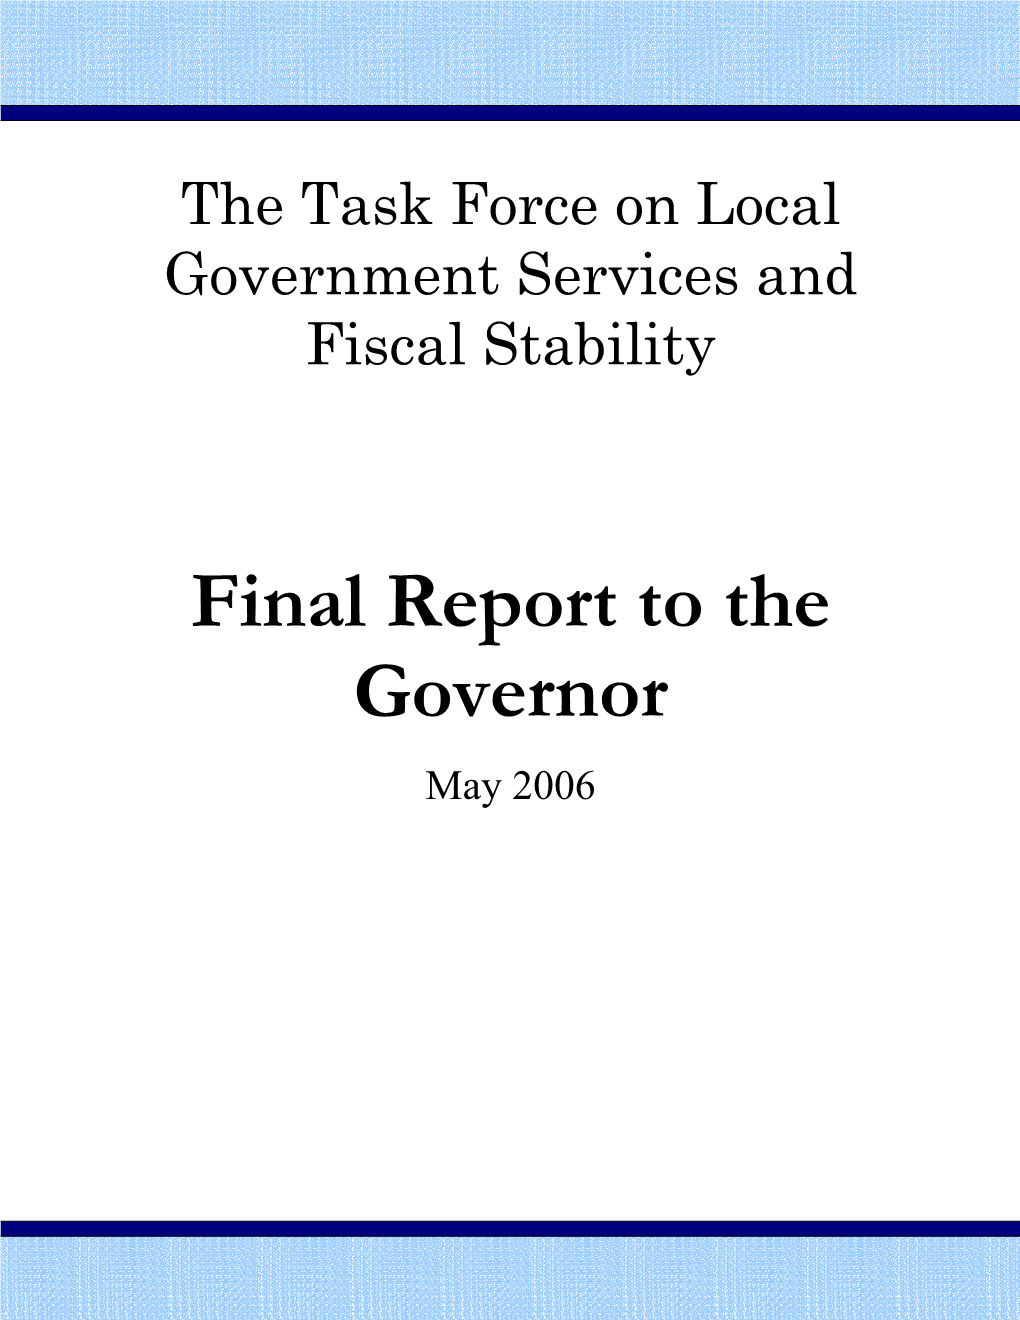 Final Report to the Governor